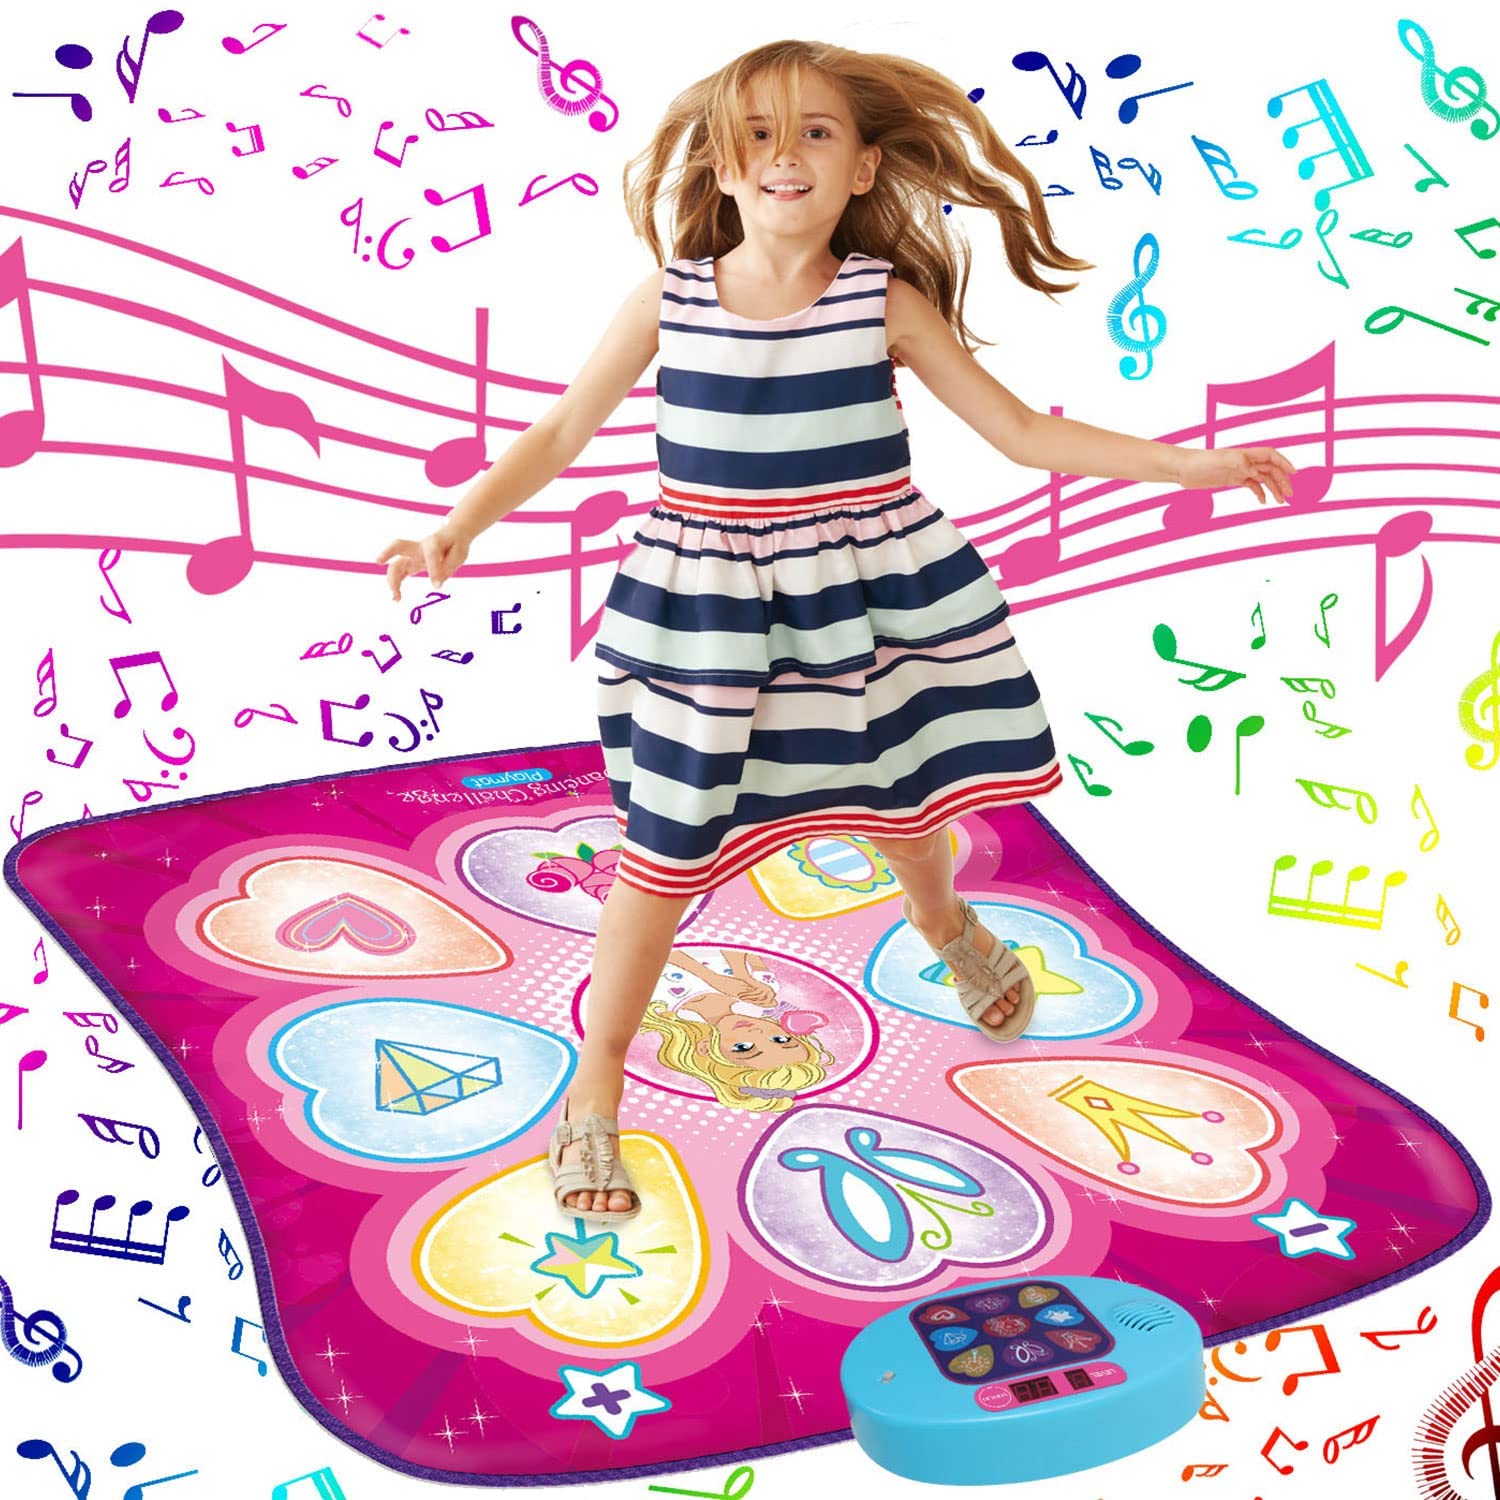 acplaypen Dance Mat - Dance Mixer Rhythm Step Play Mat - Dance Game Toy Gift for Kids Girls Boys - Dance Pad with LED Lights, Adjustable Volume, Built-in Music, 3 Challenge Levels